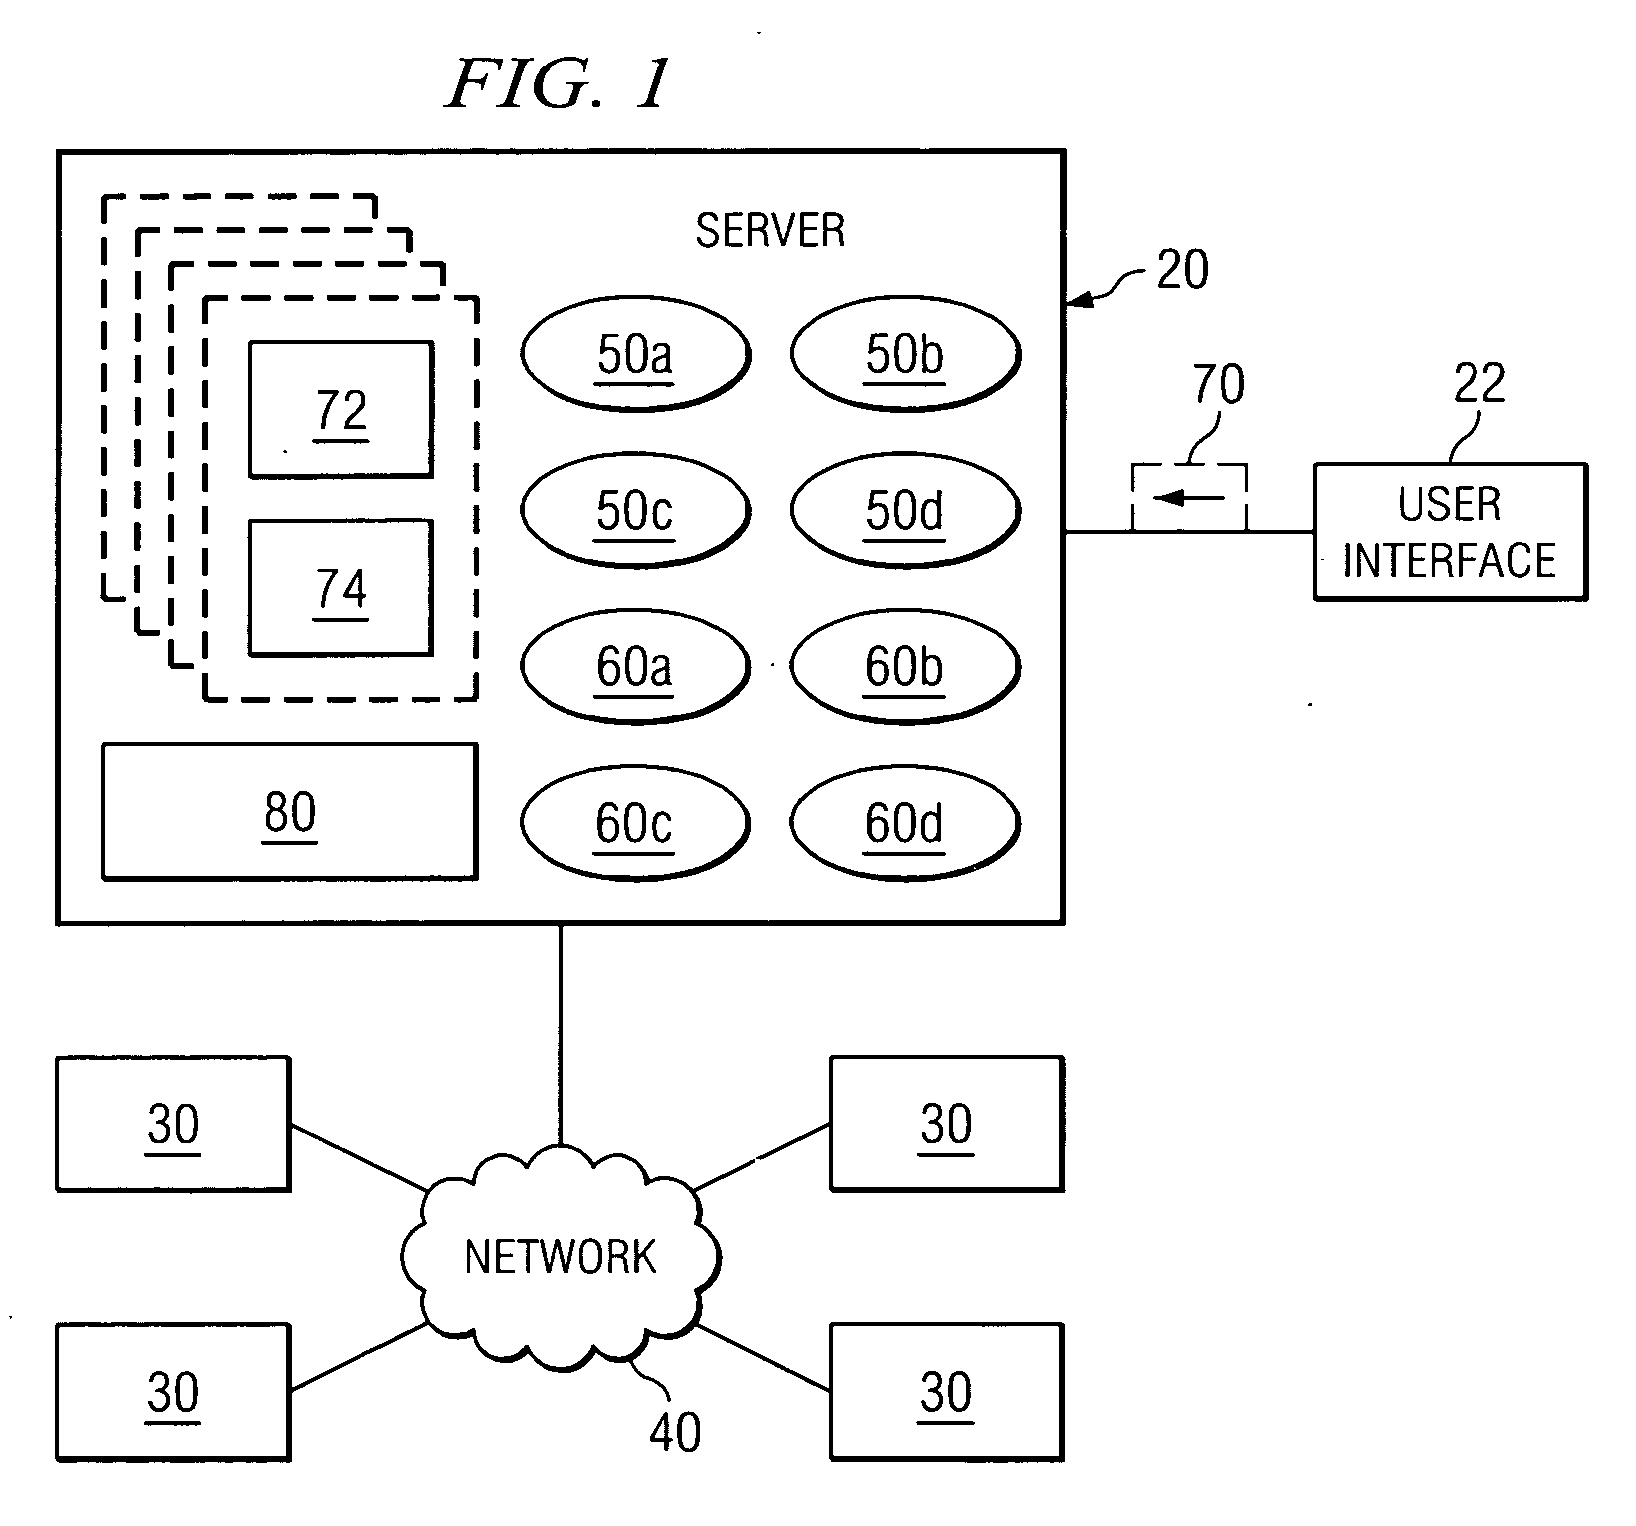 System and method for installing software